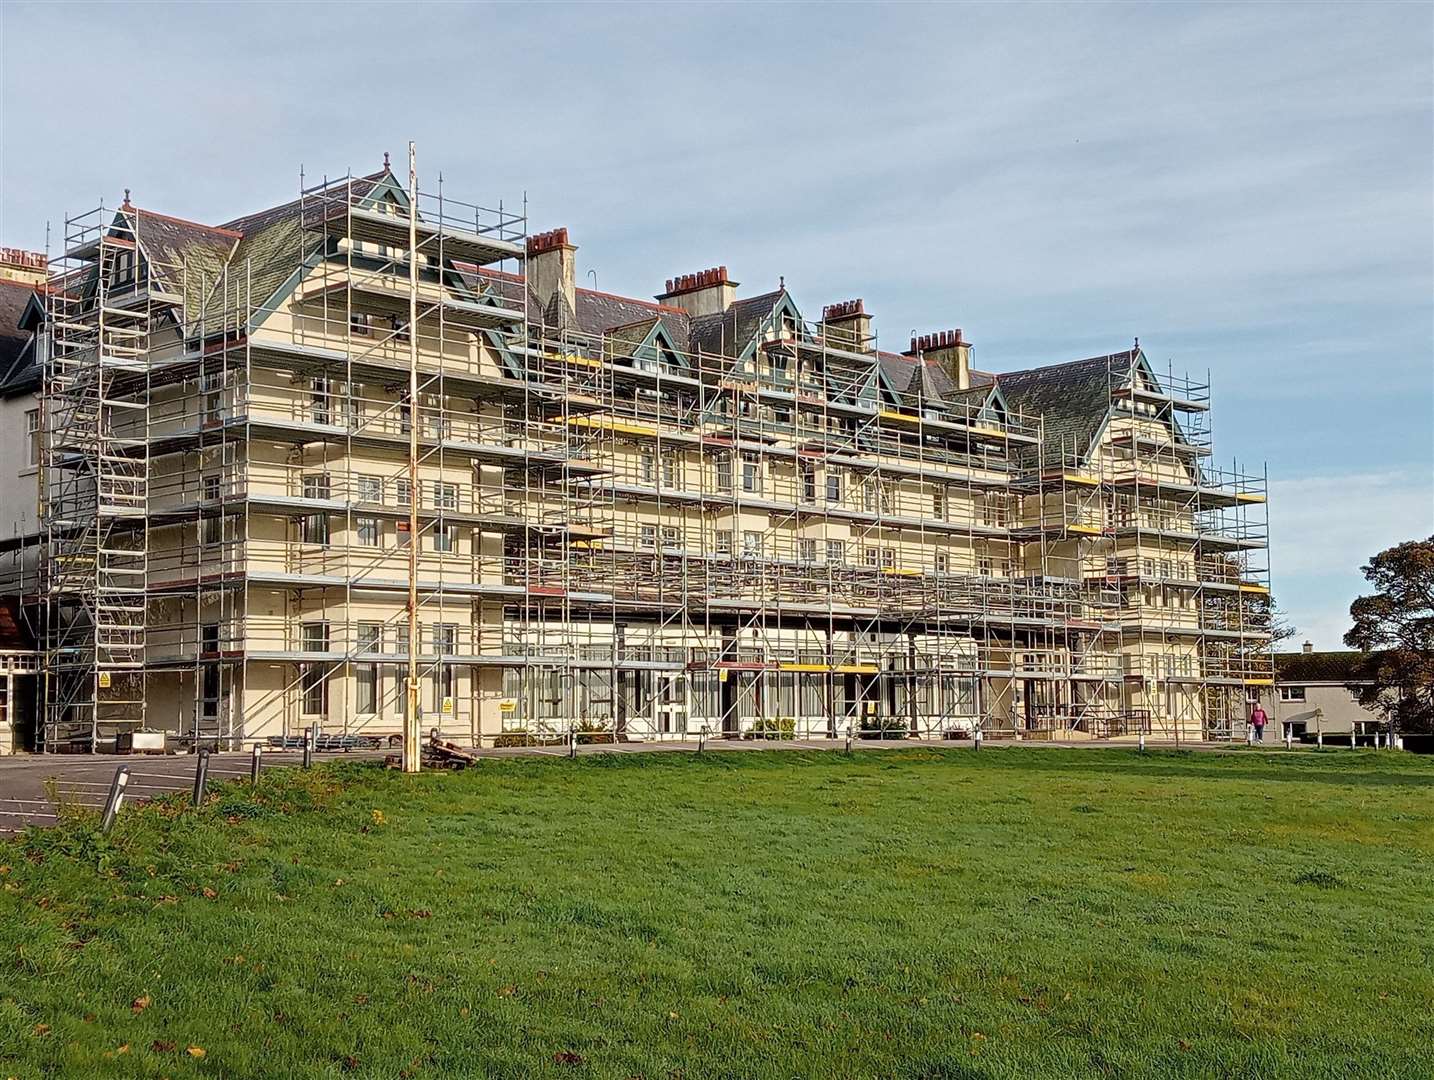 Dornoch Hotel, currently undergoing extensive renovations.